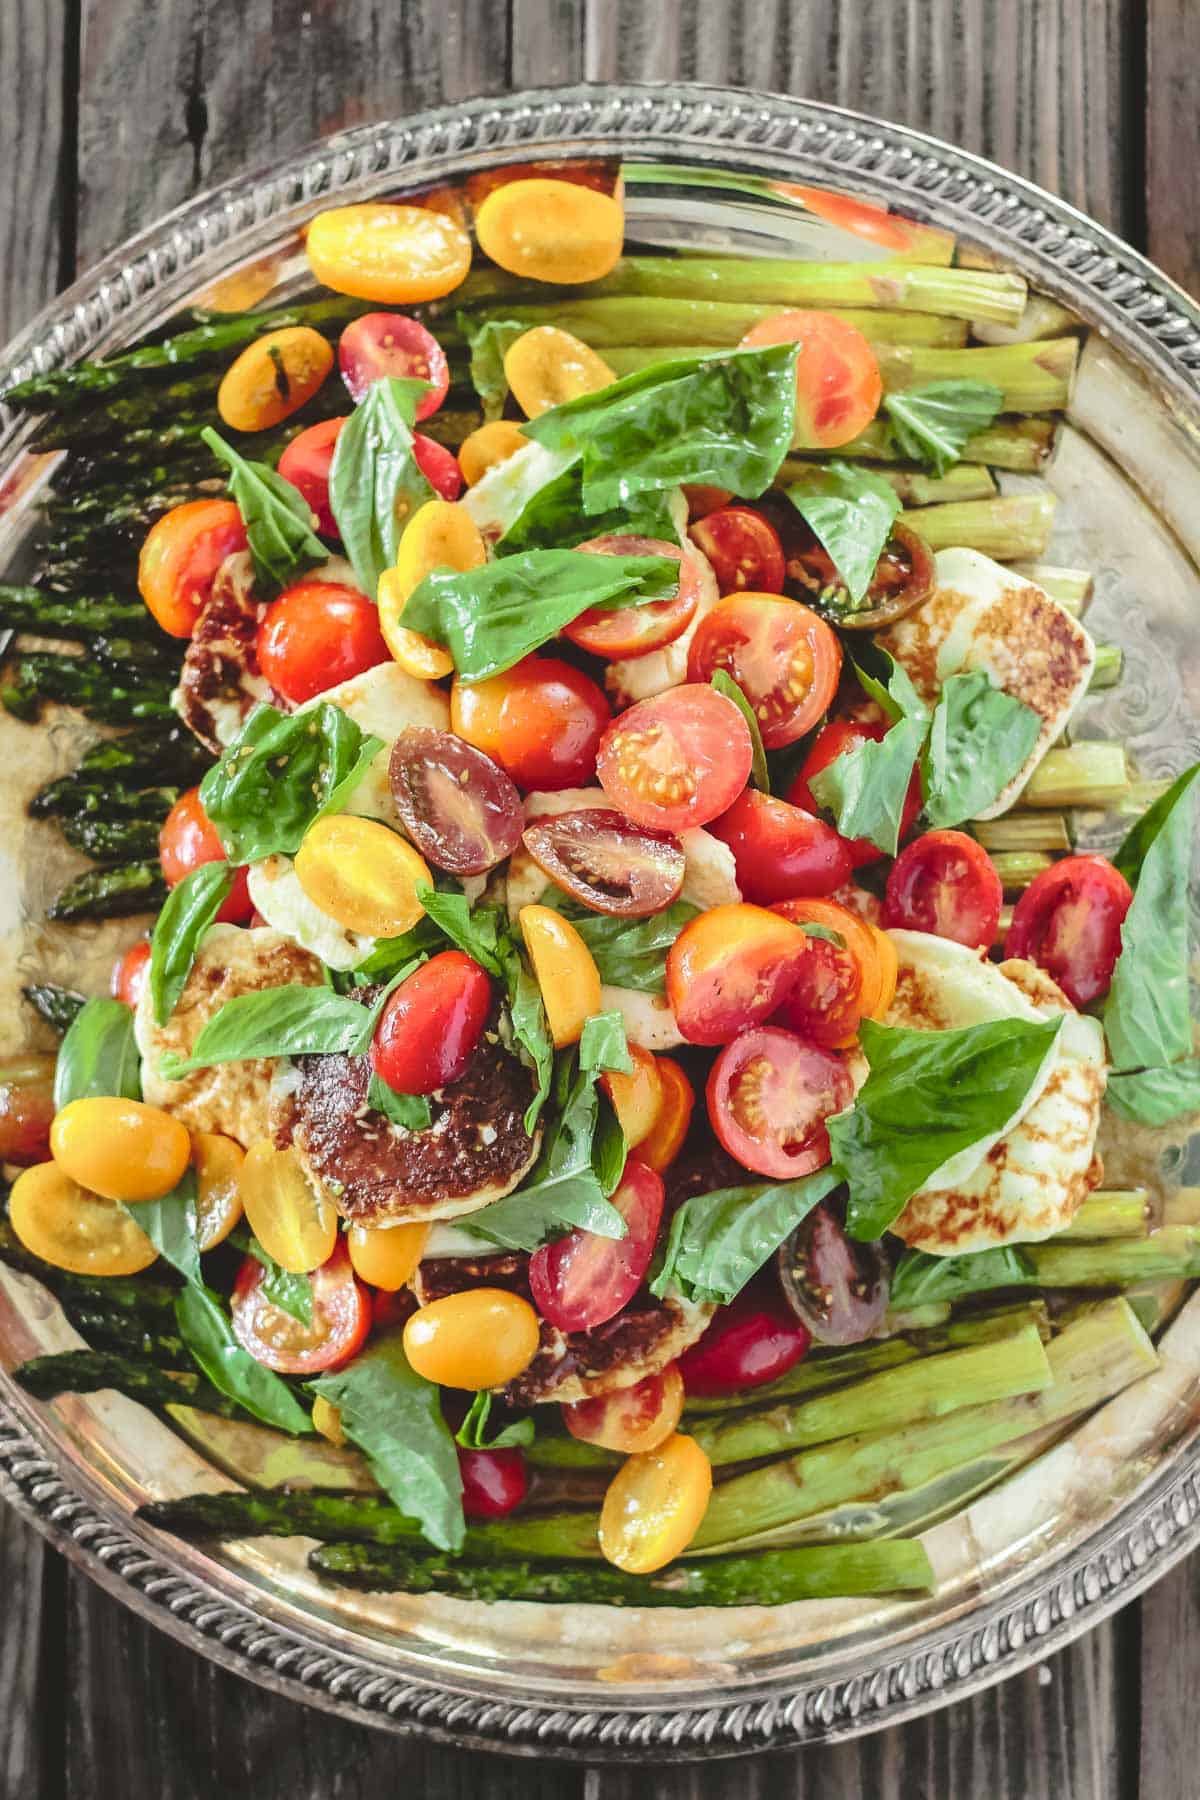 roasted asparagus salad with cherry tomatoes, halloumi cheese, and basil leaves